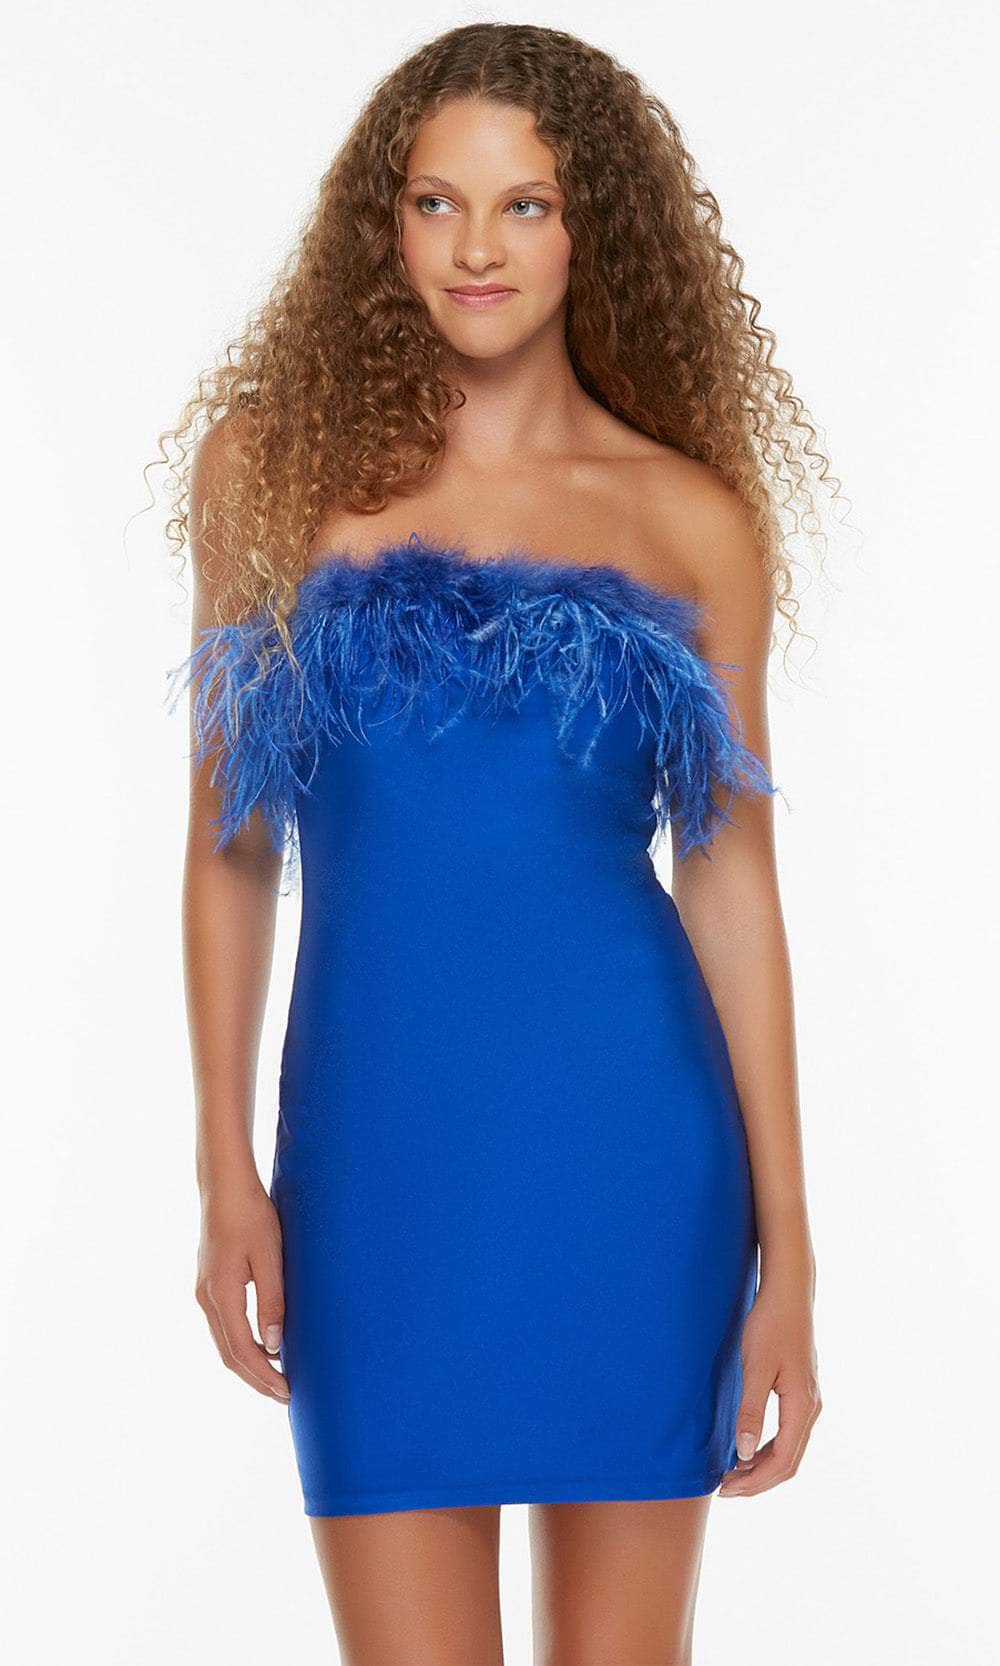 Alyce Paris 4524 - Feathered Strapless Cocktail Dress